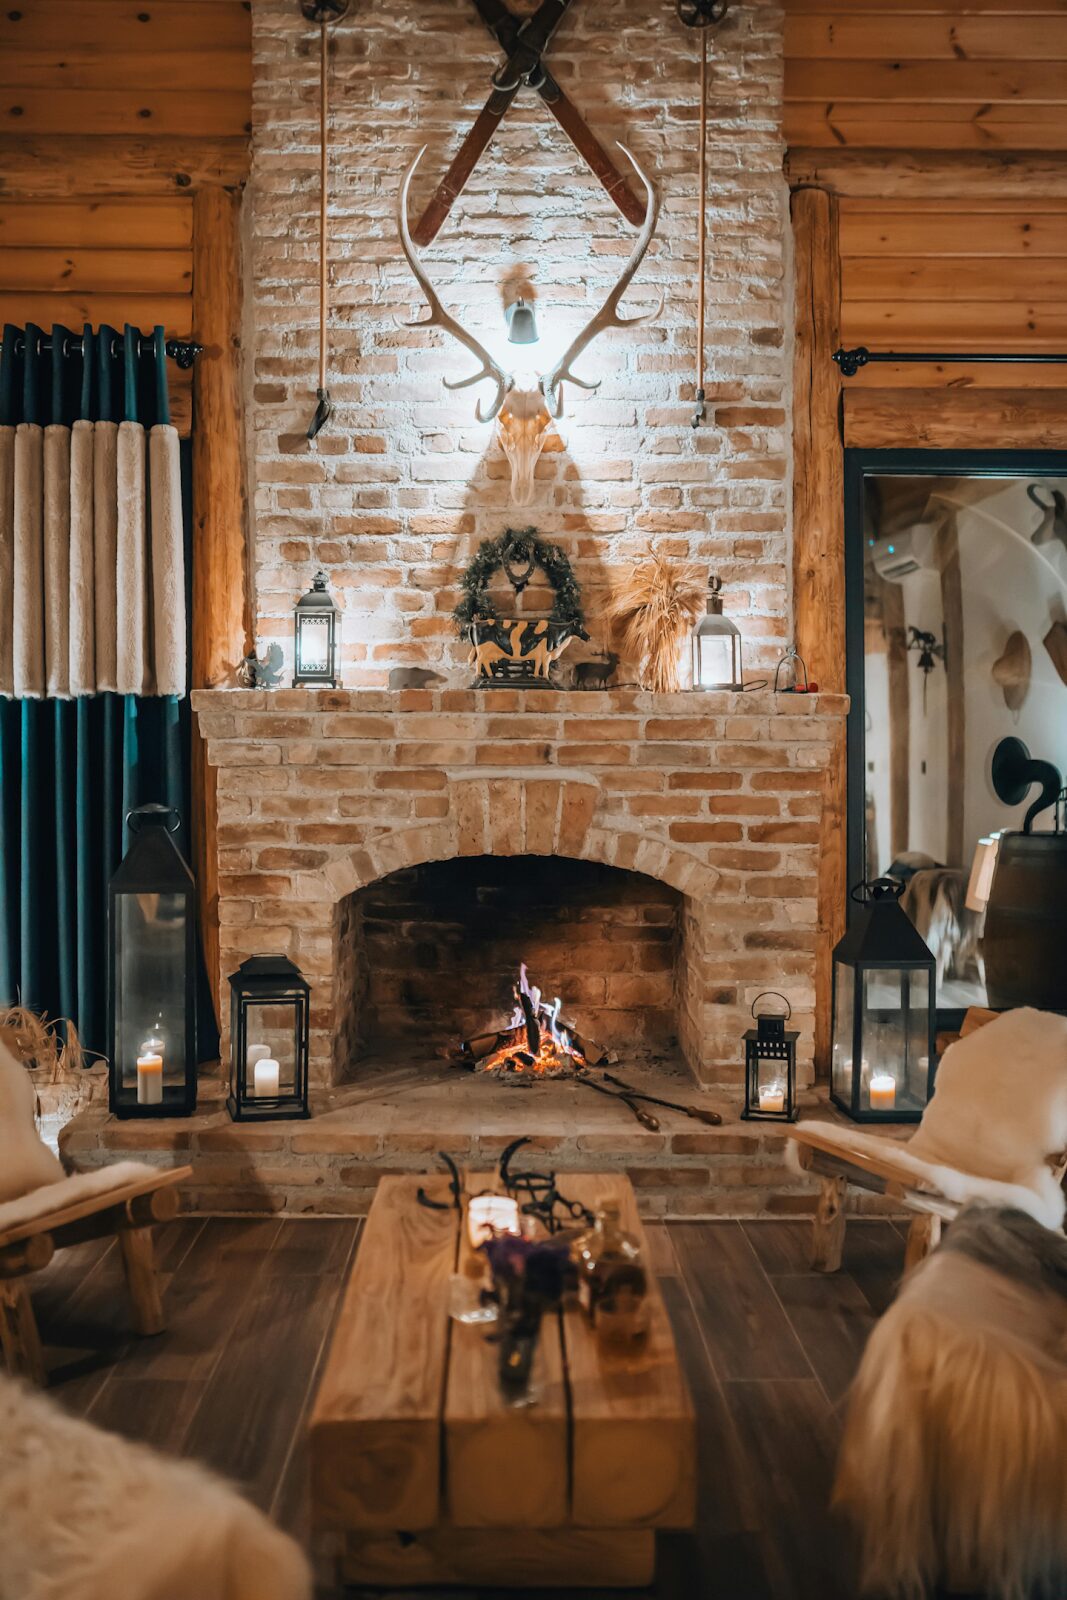 https://www.pexels.com/photo/rustic-living-room-with-brick-fireplace-18091222/